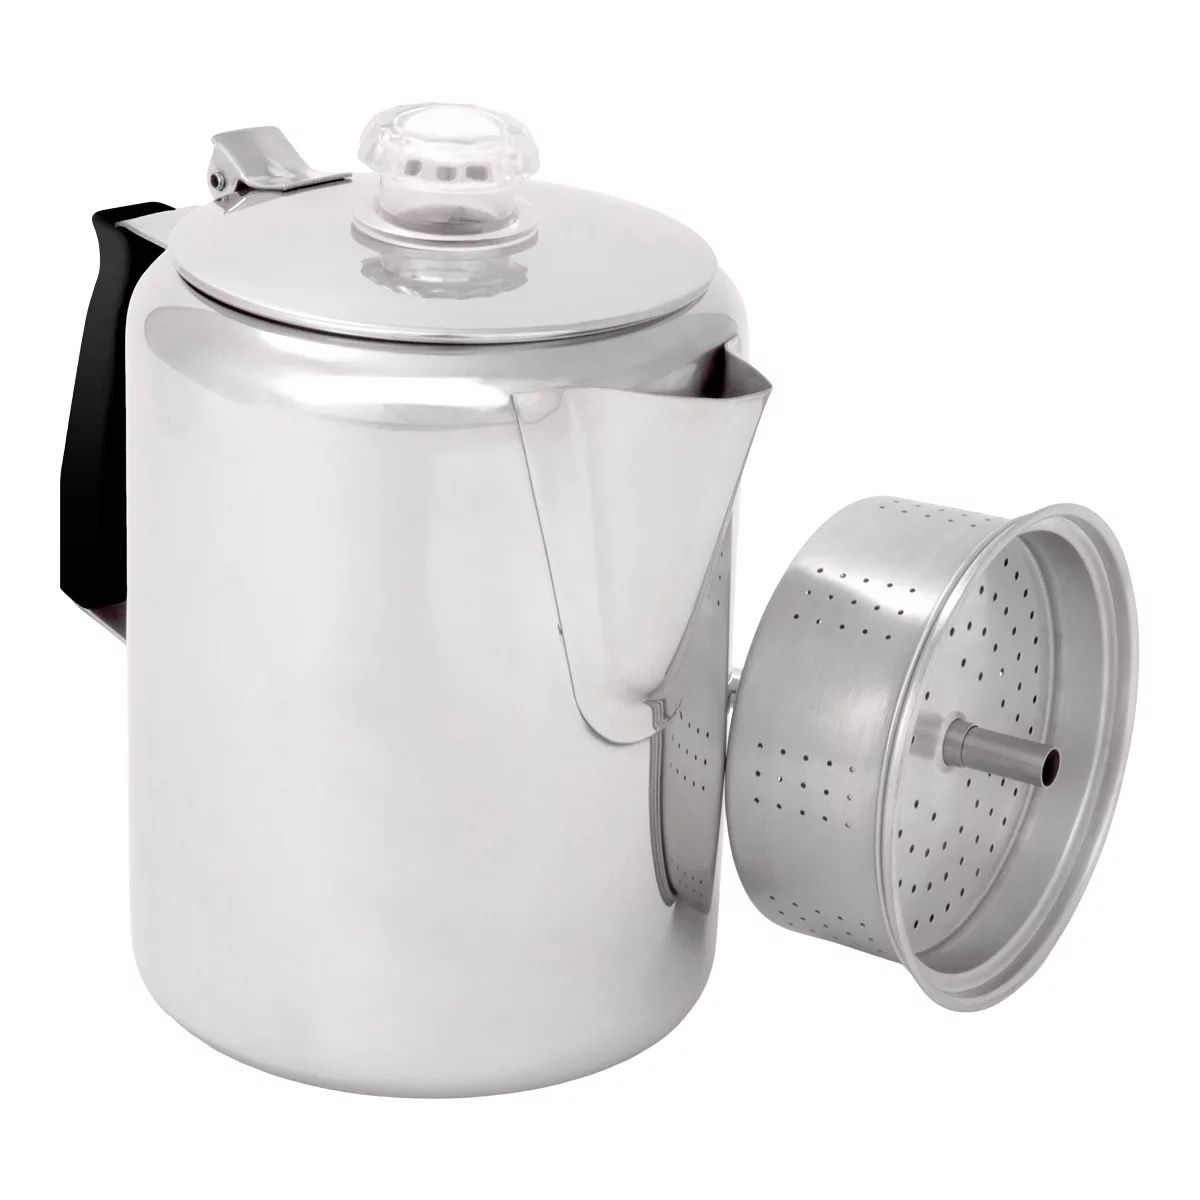 Image of GSI Glacier Stainless 9 Cup Percolator